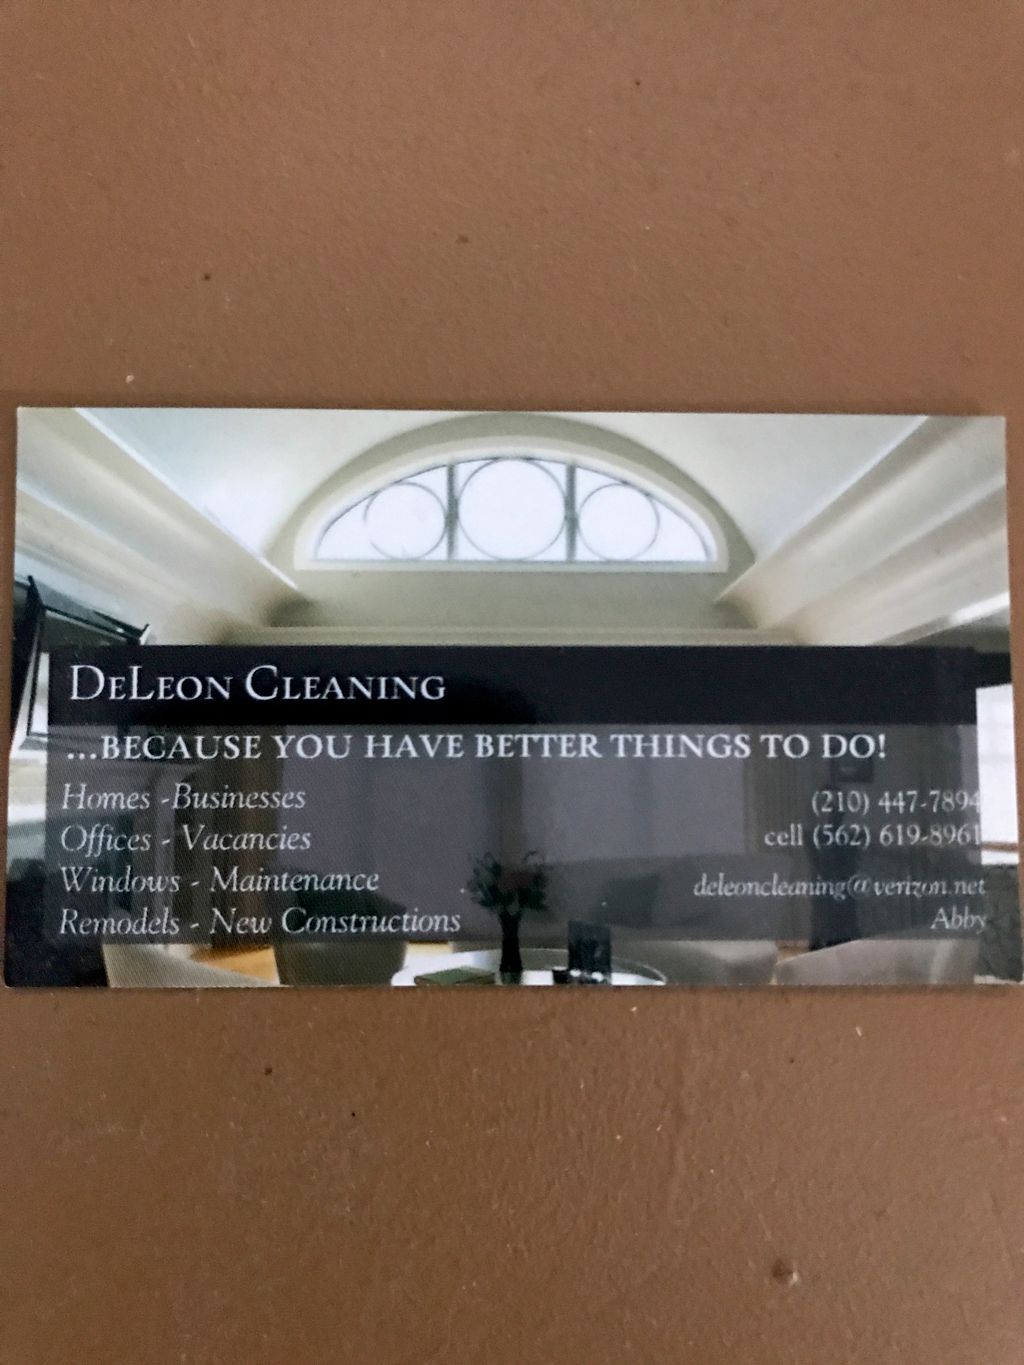 DeLeon Cleaning Service